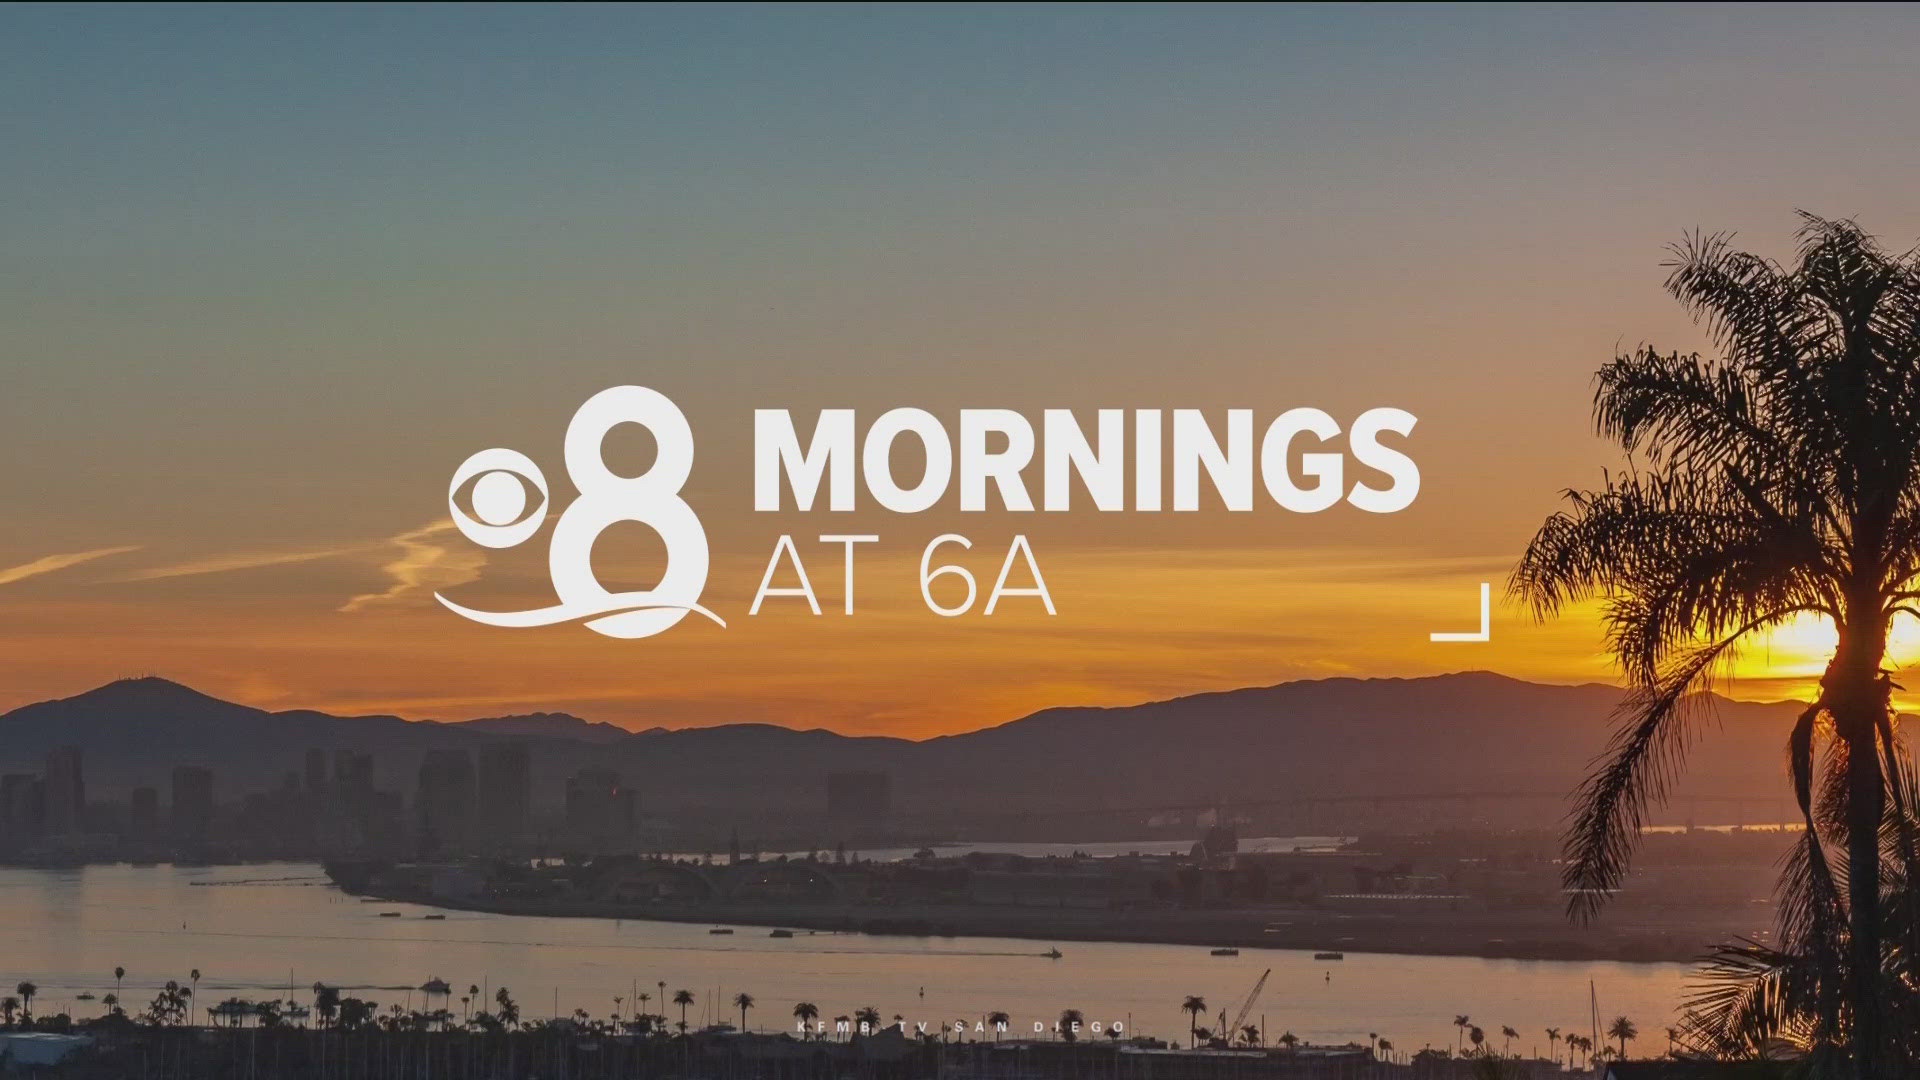 Here are the top stories around San Diego County for the morning of Friday, May 17.
For the latest news, weather and sports, head to:
https://www.cbs8.com/